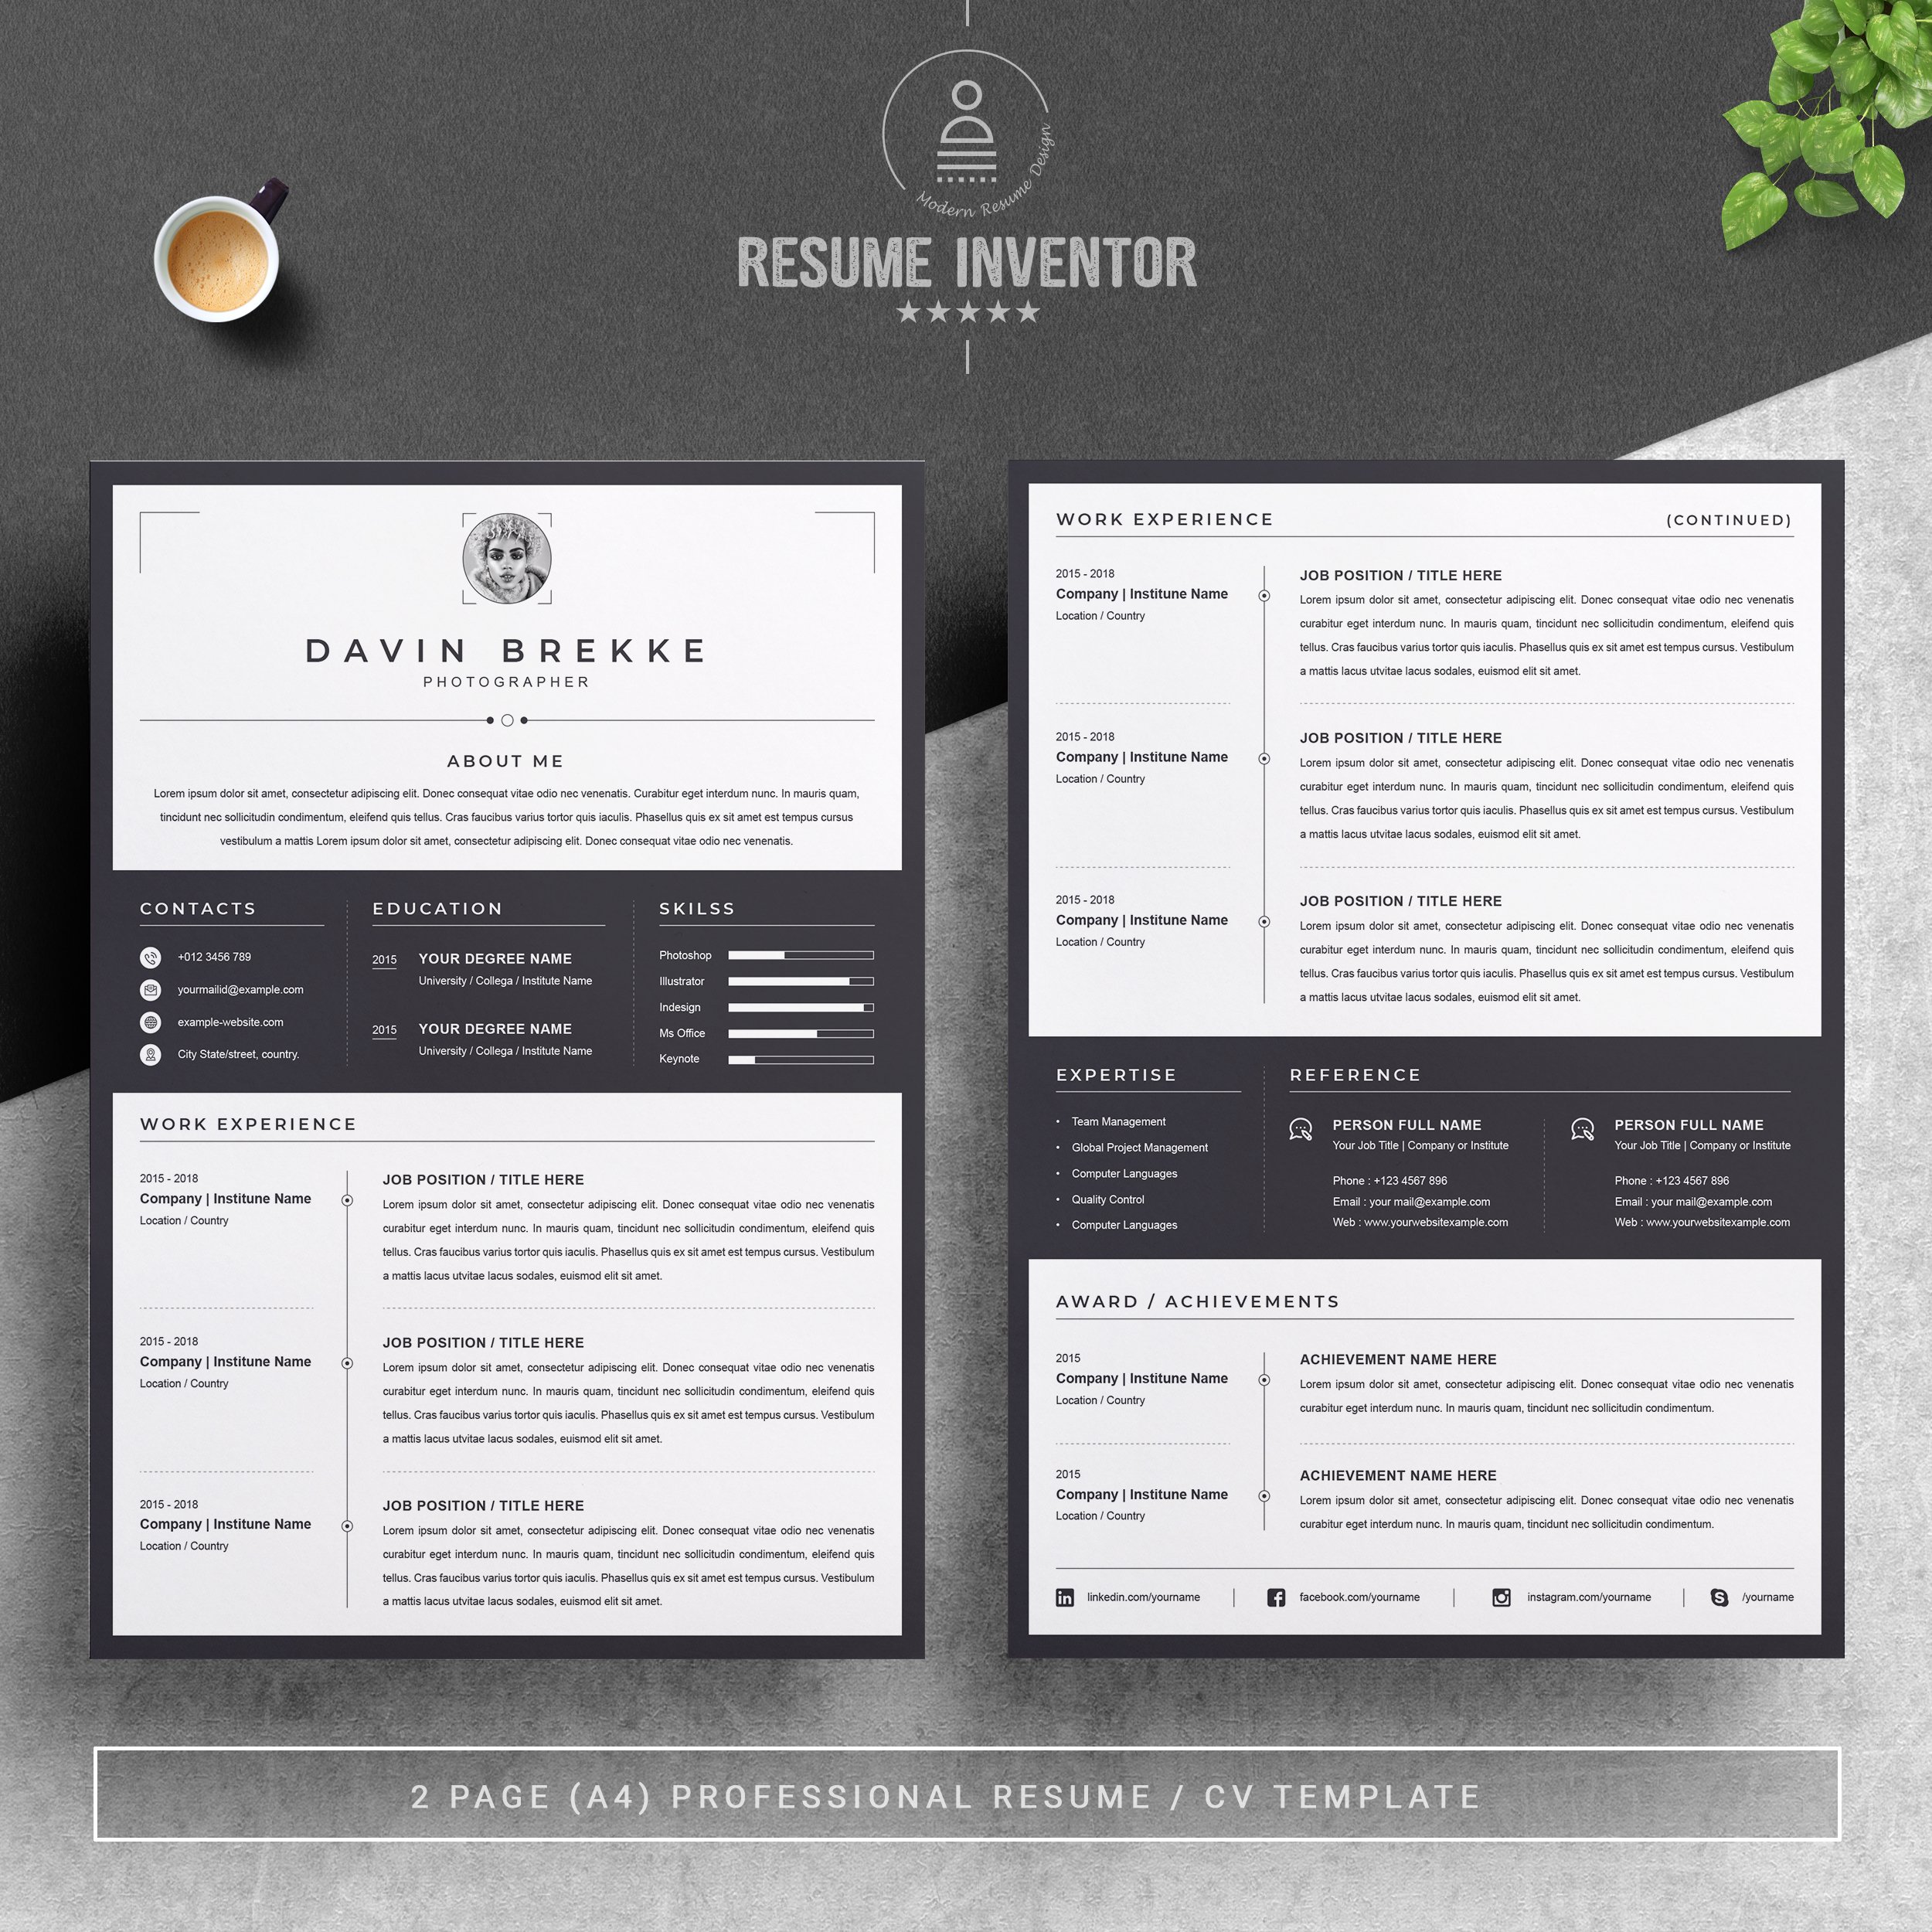 Resume / CV Template preview image.